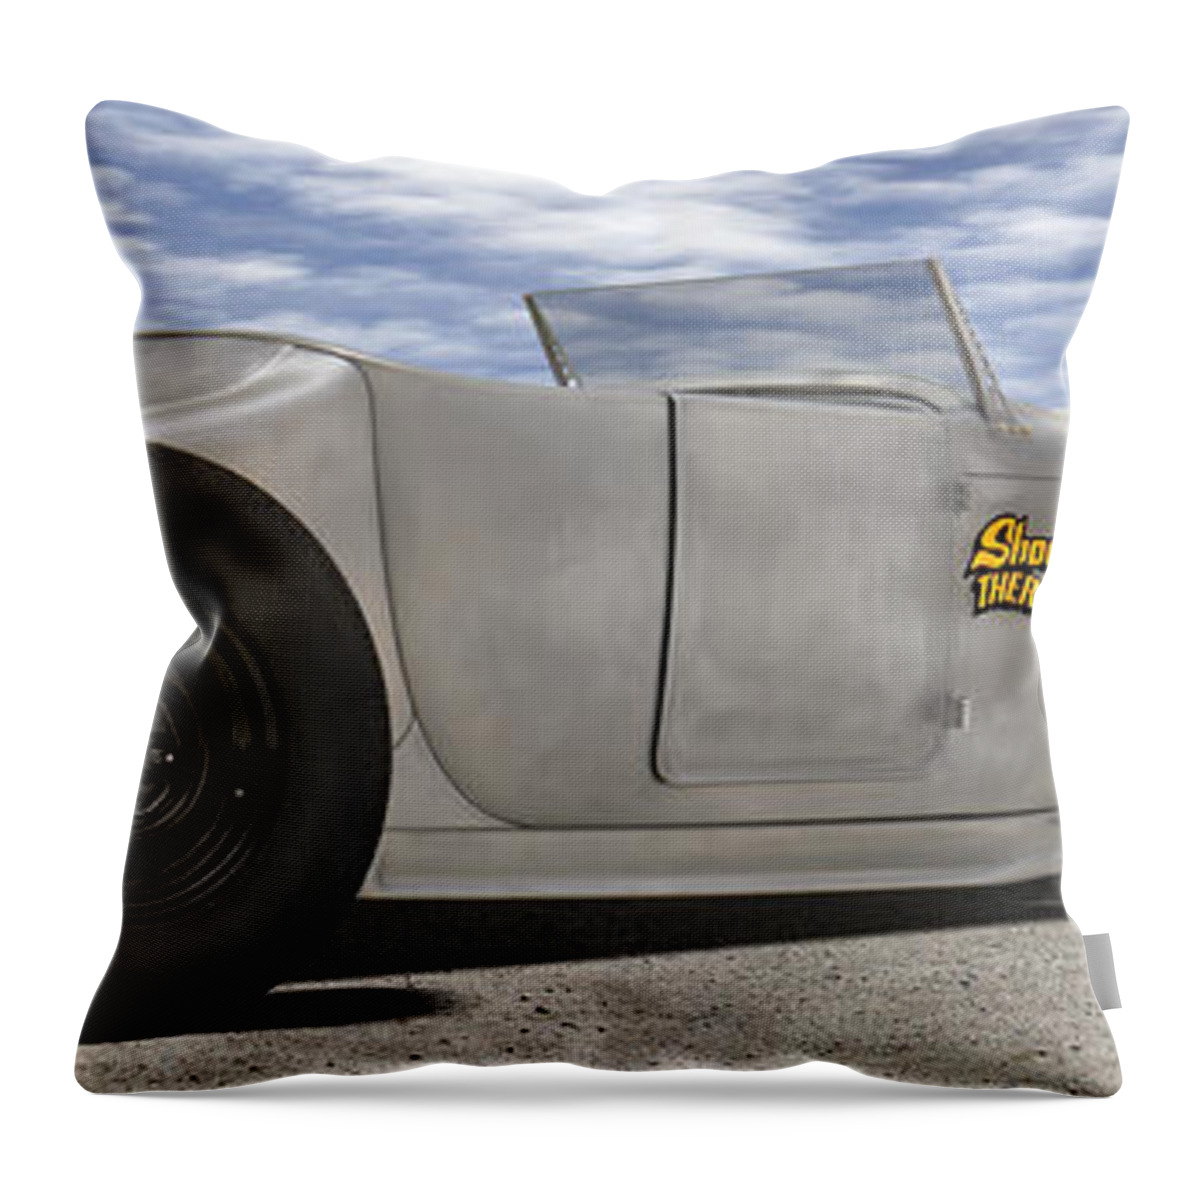 Transportation Throw Pillow featuring the photograph Shock Therapy at Gallap by Mike McGlothlen